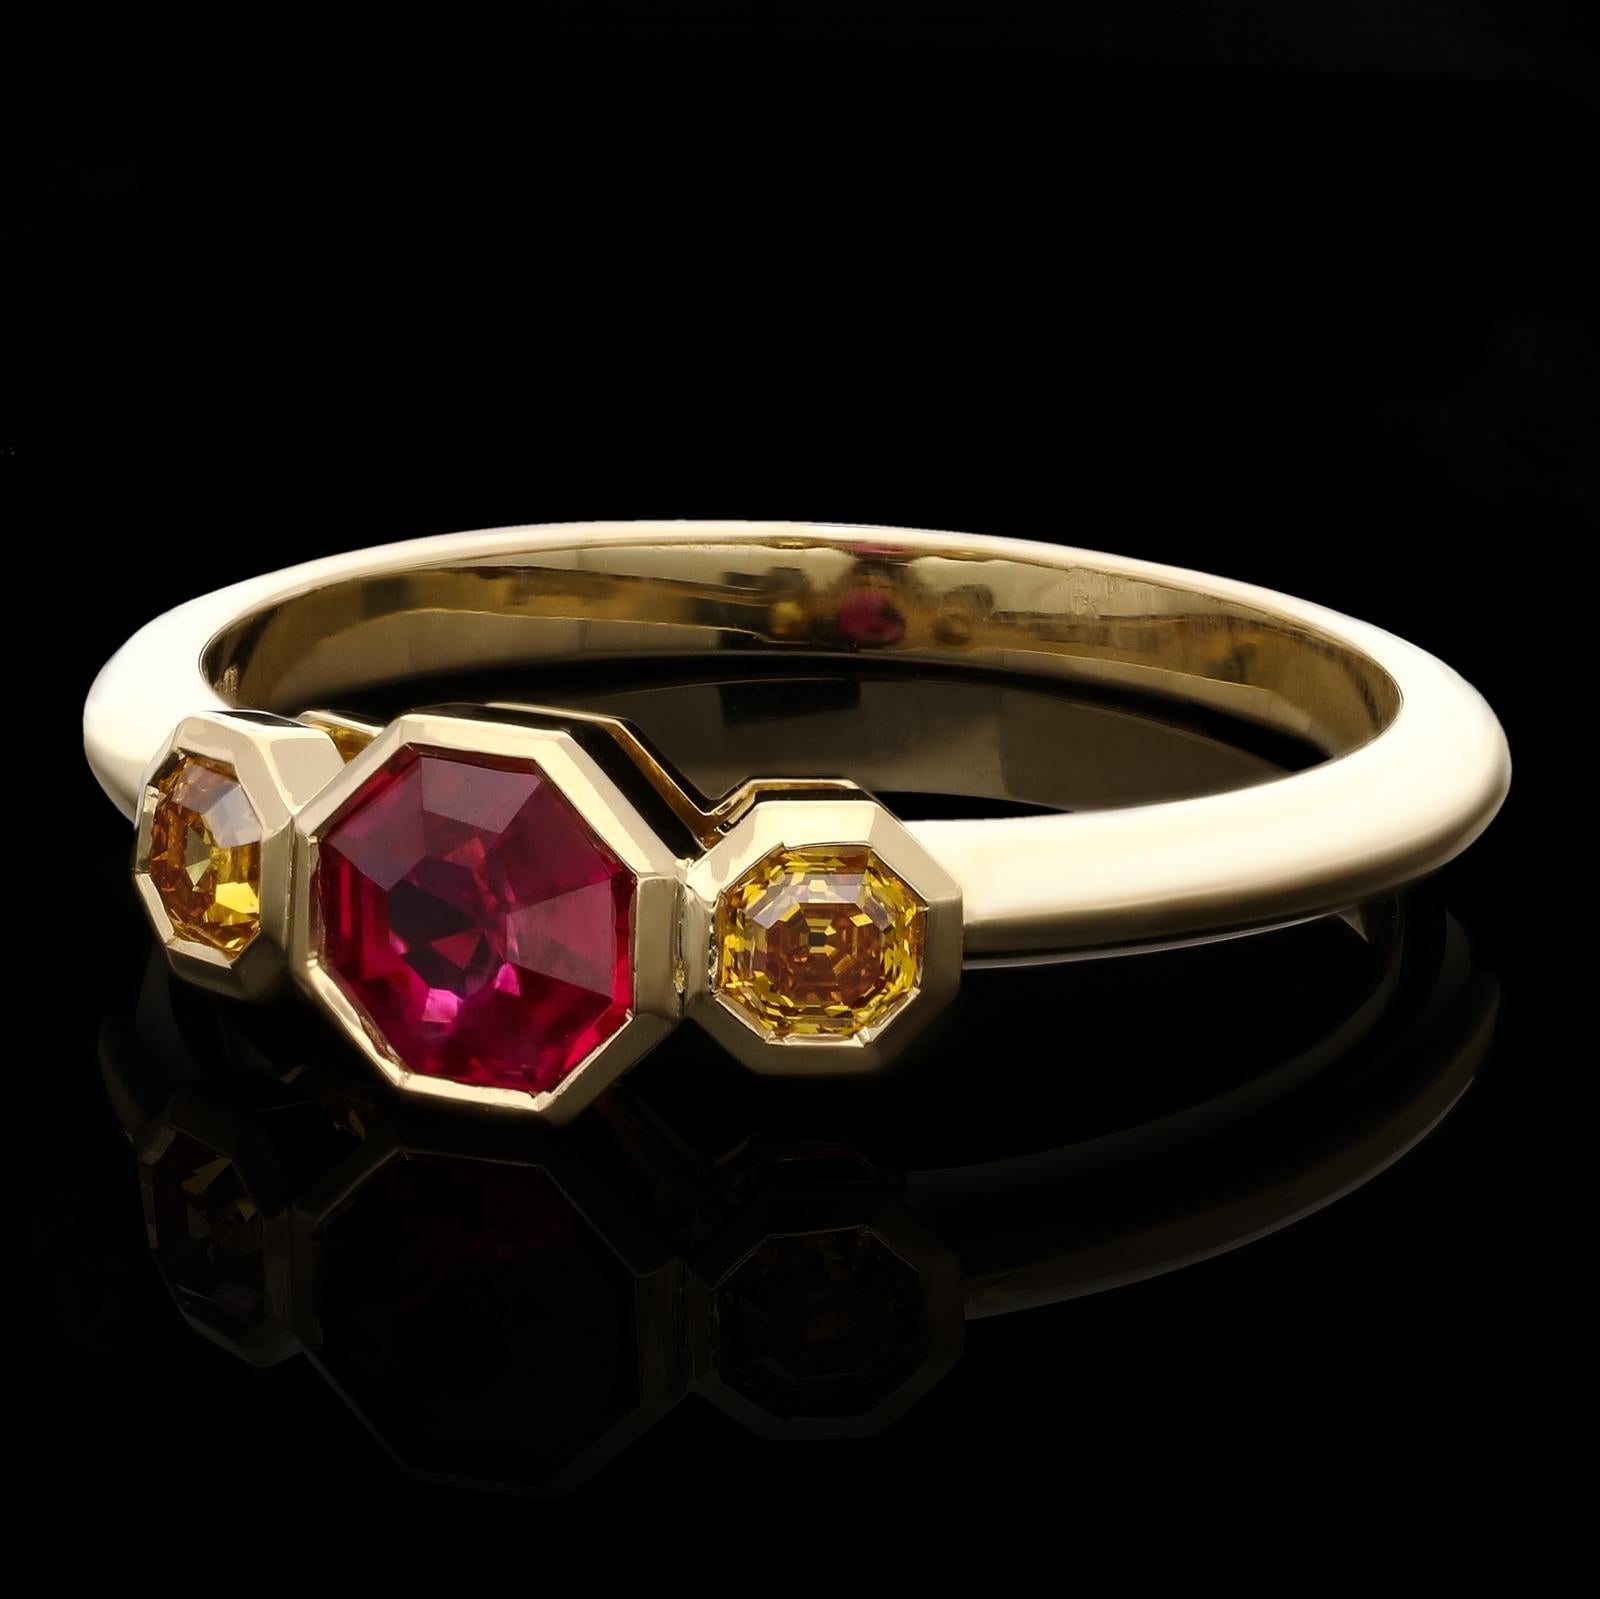 A beautiful and unusual ruby and fancy colour diamond three stone ring by Hancocks, centred with a richly coloured Assher cut Burmese ruby weighing 0.52cts between shoulders of octagonal fancy coloured orangey-yellow diamonds weighing 0.20ct in